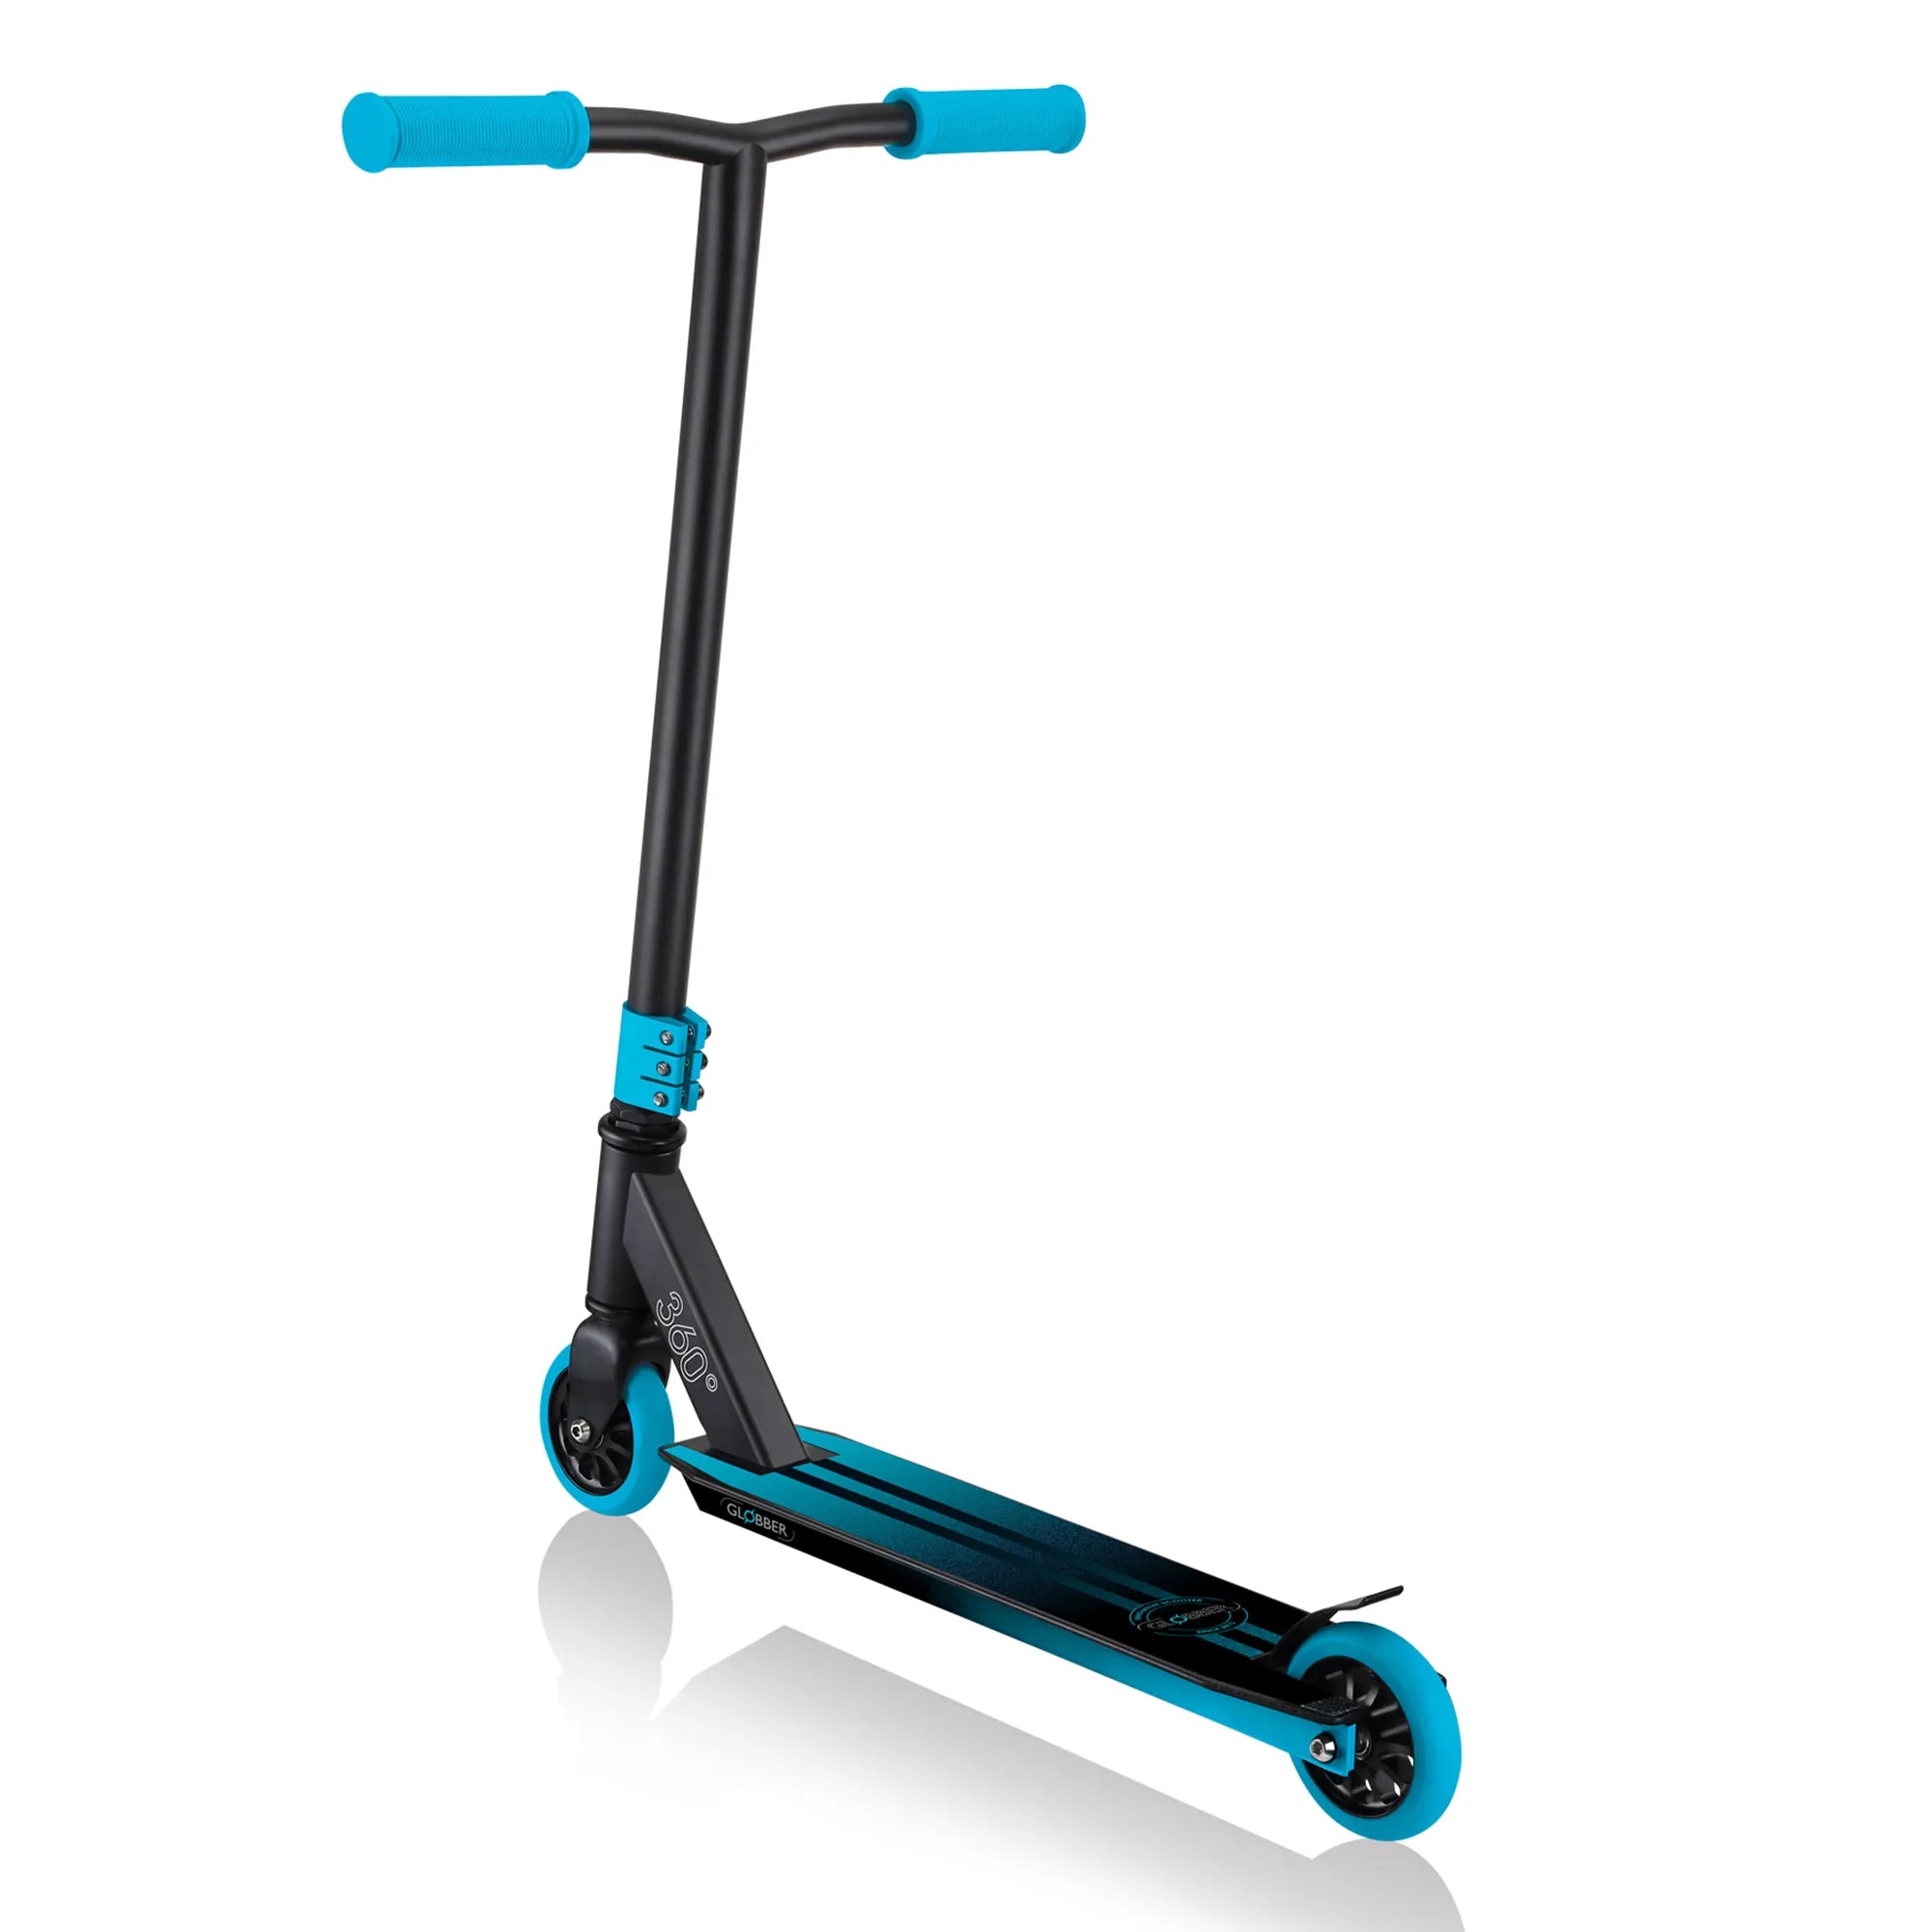 Globber GS 360 - Beginner Stunt Scooter - Black & Blue - Ages 6-Adult - Brown's Hobby & Game